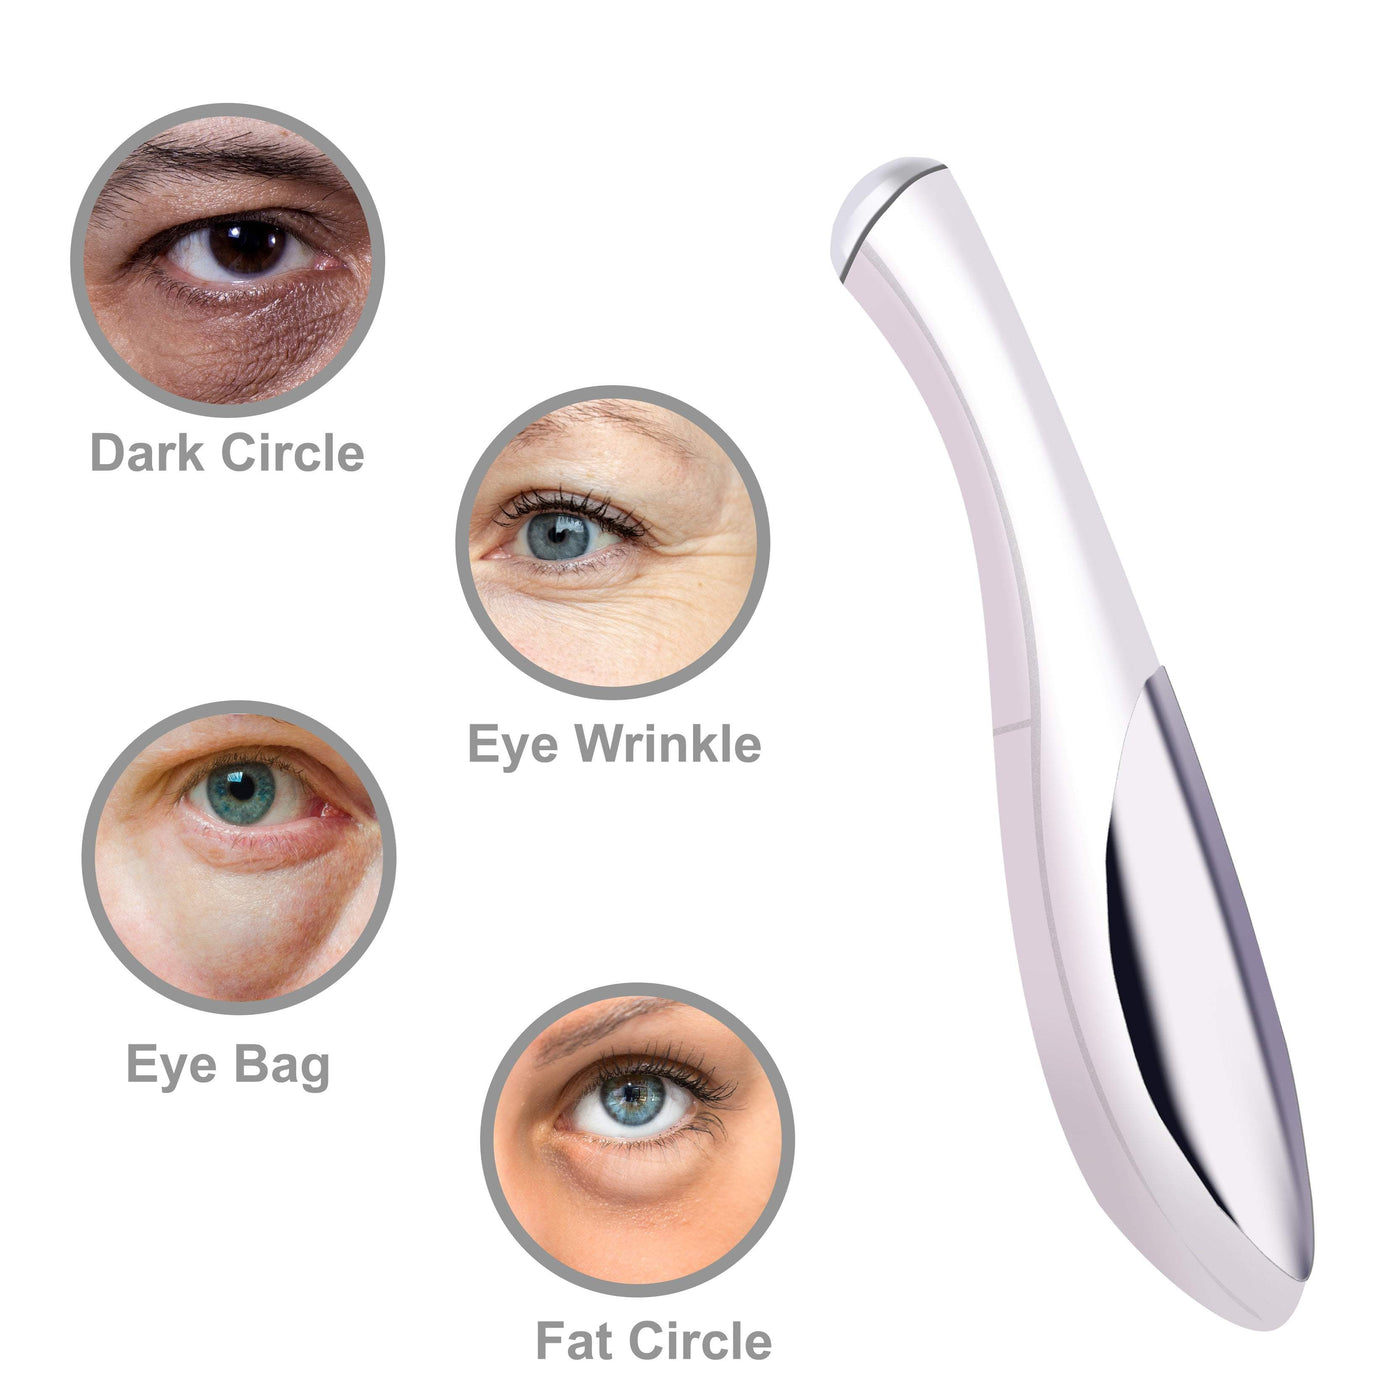 Wrinkle Skin Therapy Ionic Lift Wand - Allows Active Anti-aging Nutrients to Penetrate 30% Deeper Into Skin